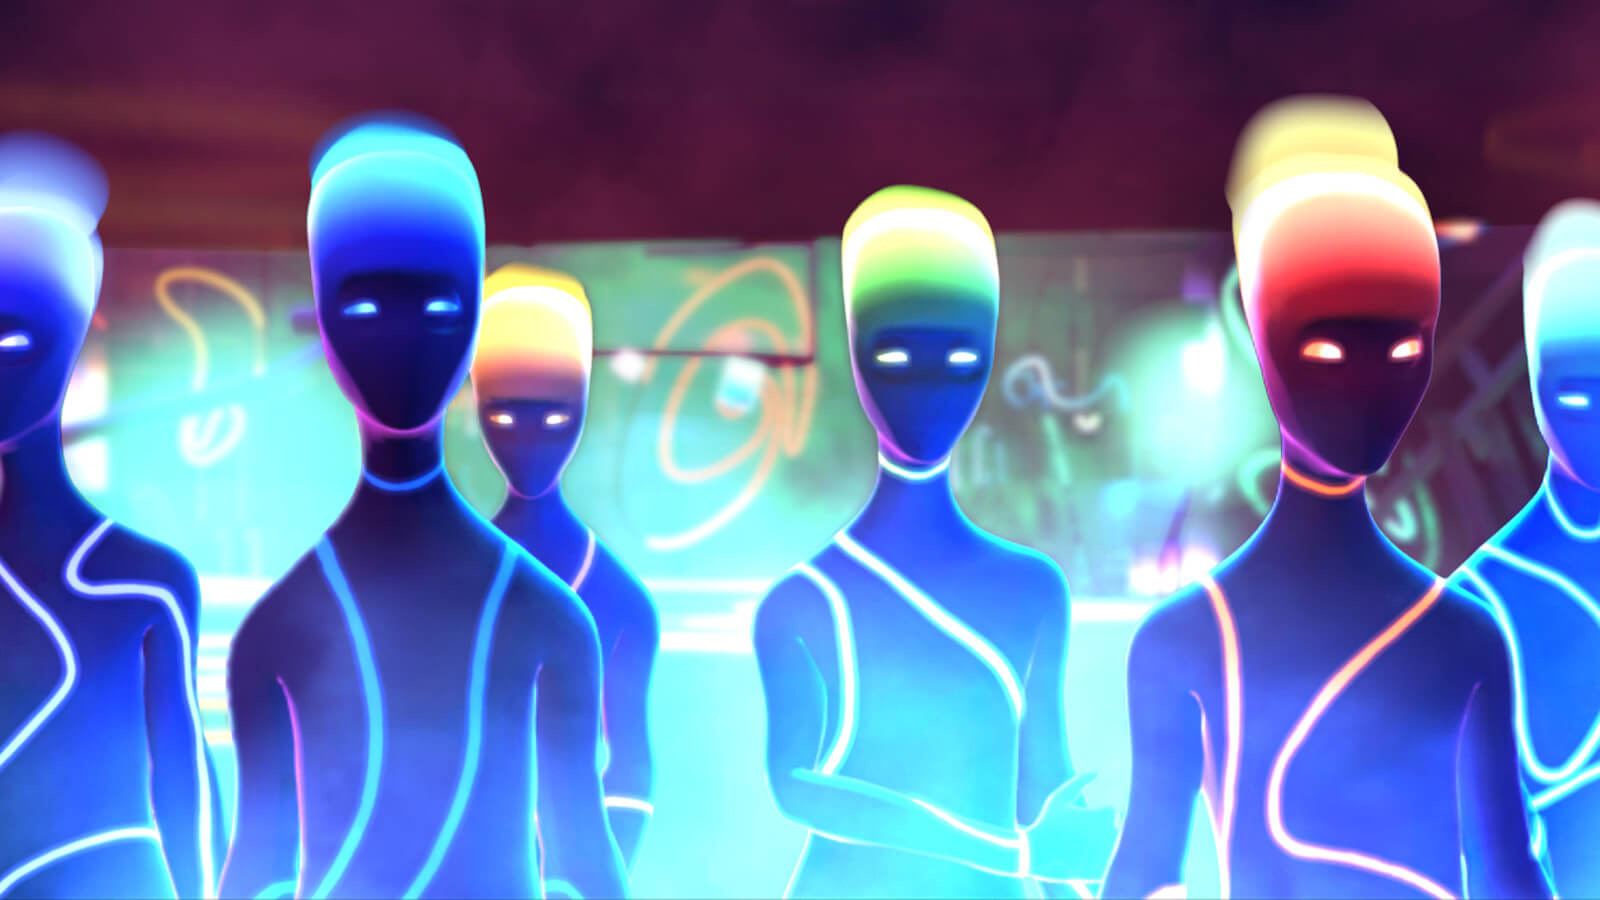 Two rows of humanoid figures stand in front of a wall with neon lights